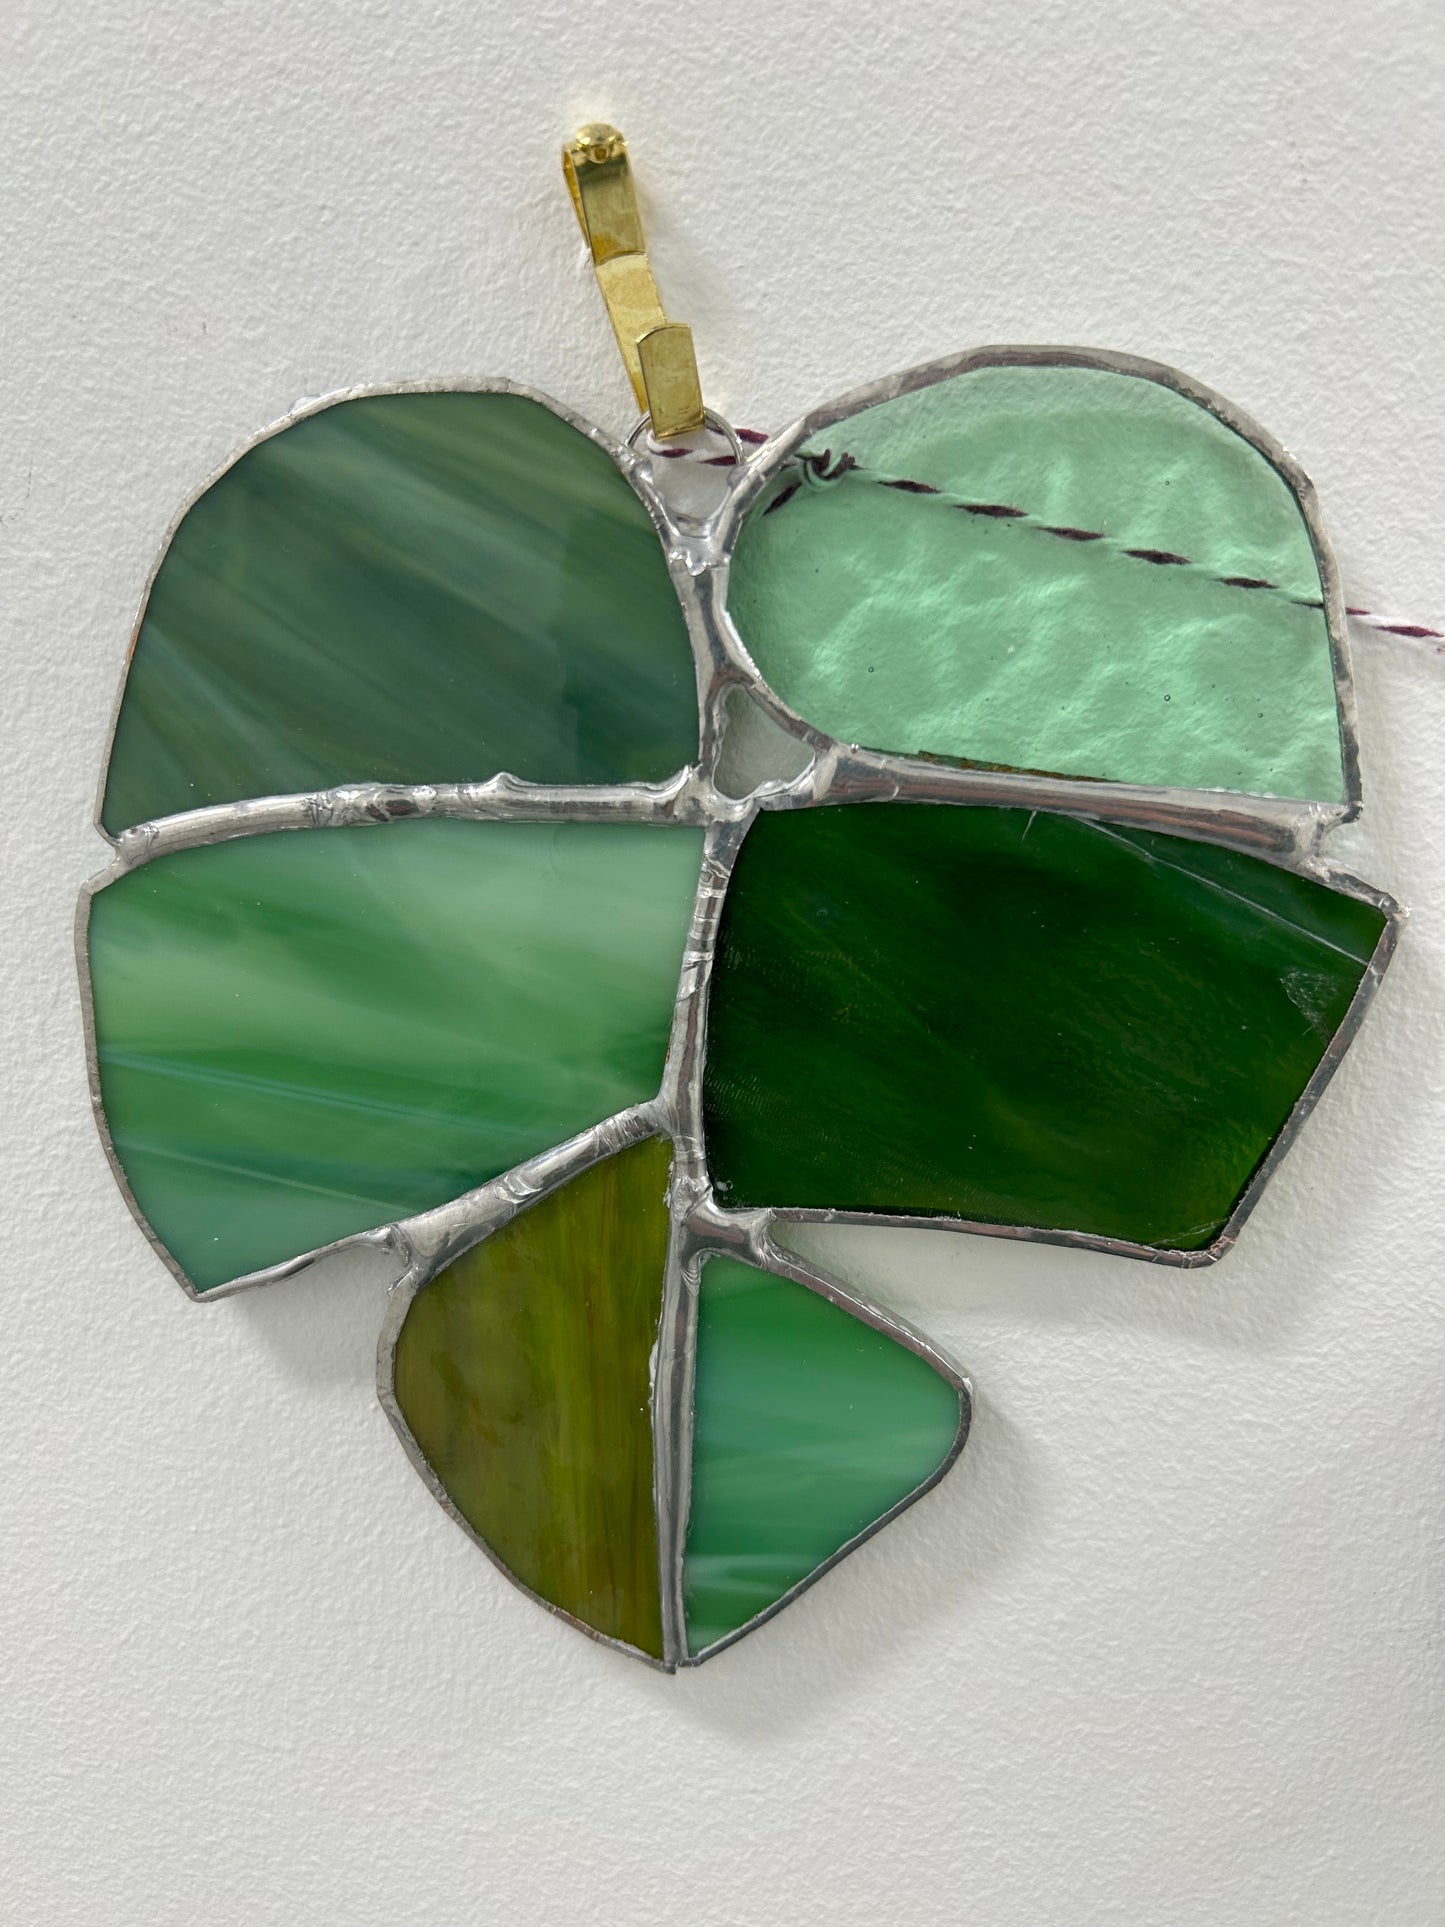 Beginner Stained Glass class, April 6, 11-1:30 pm